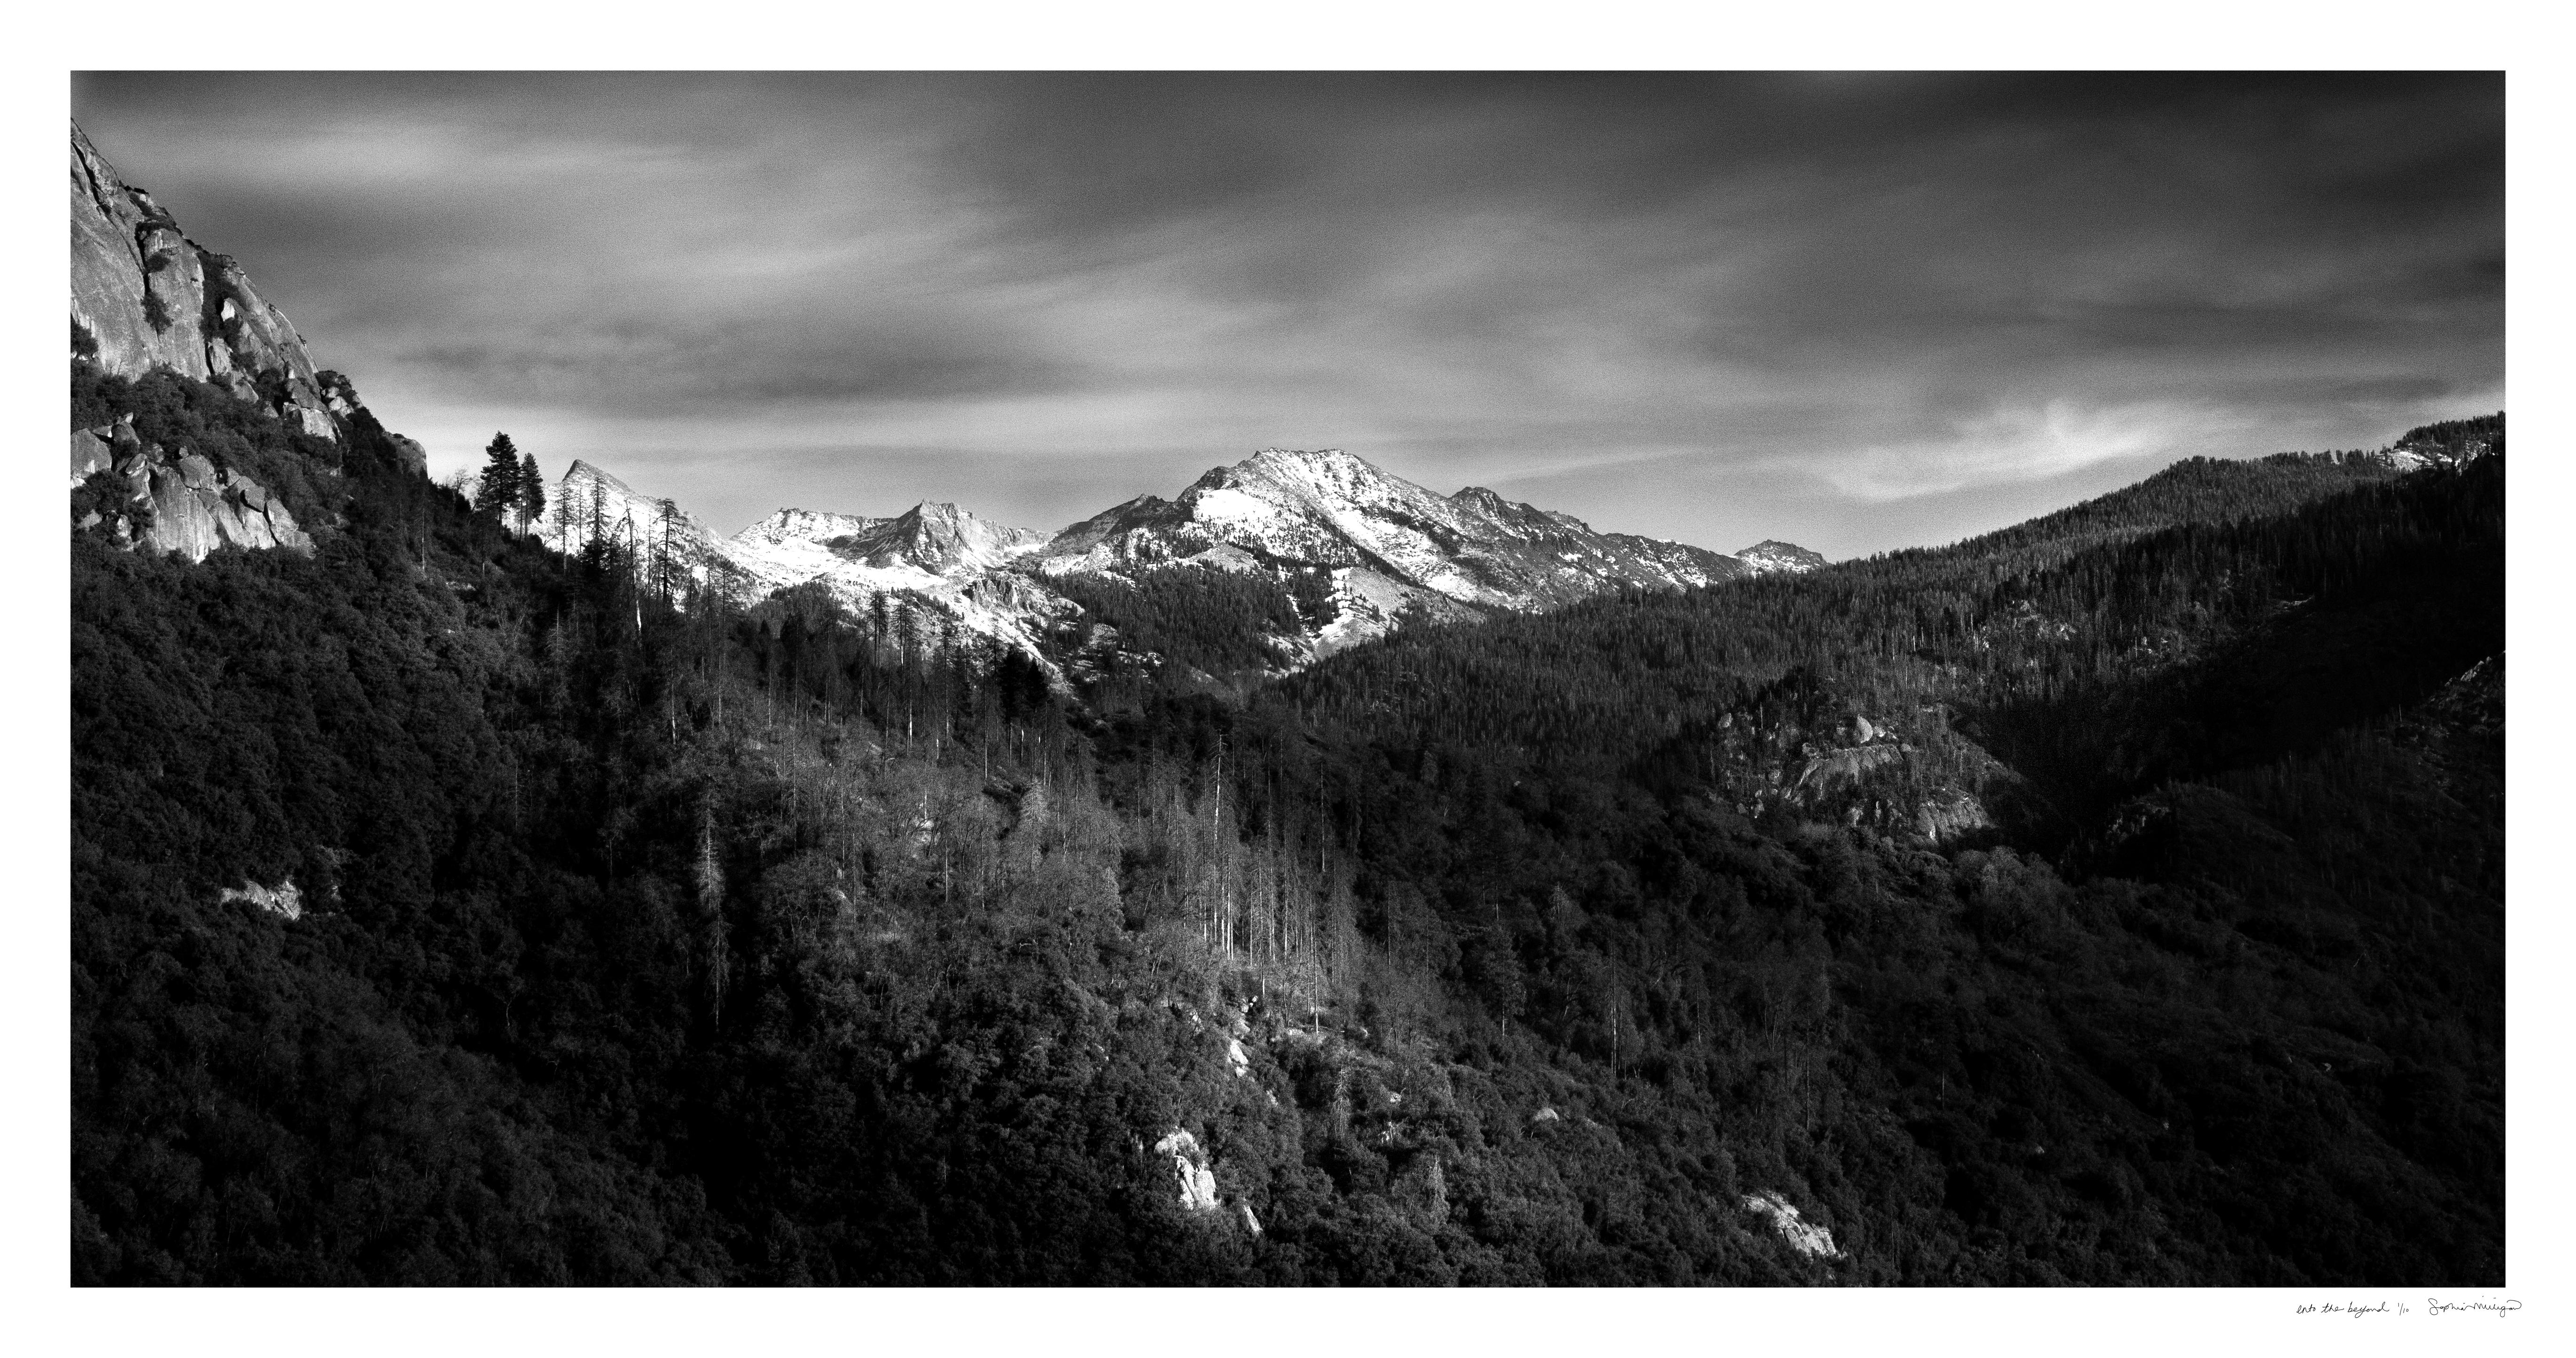 Sophia Milligan Black and White Photograph - 'Into The Beyond'. Wild nature mountain panorama sky snow forest landscape white